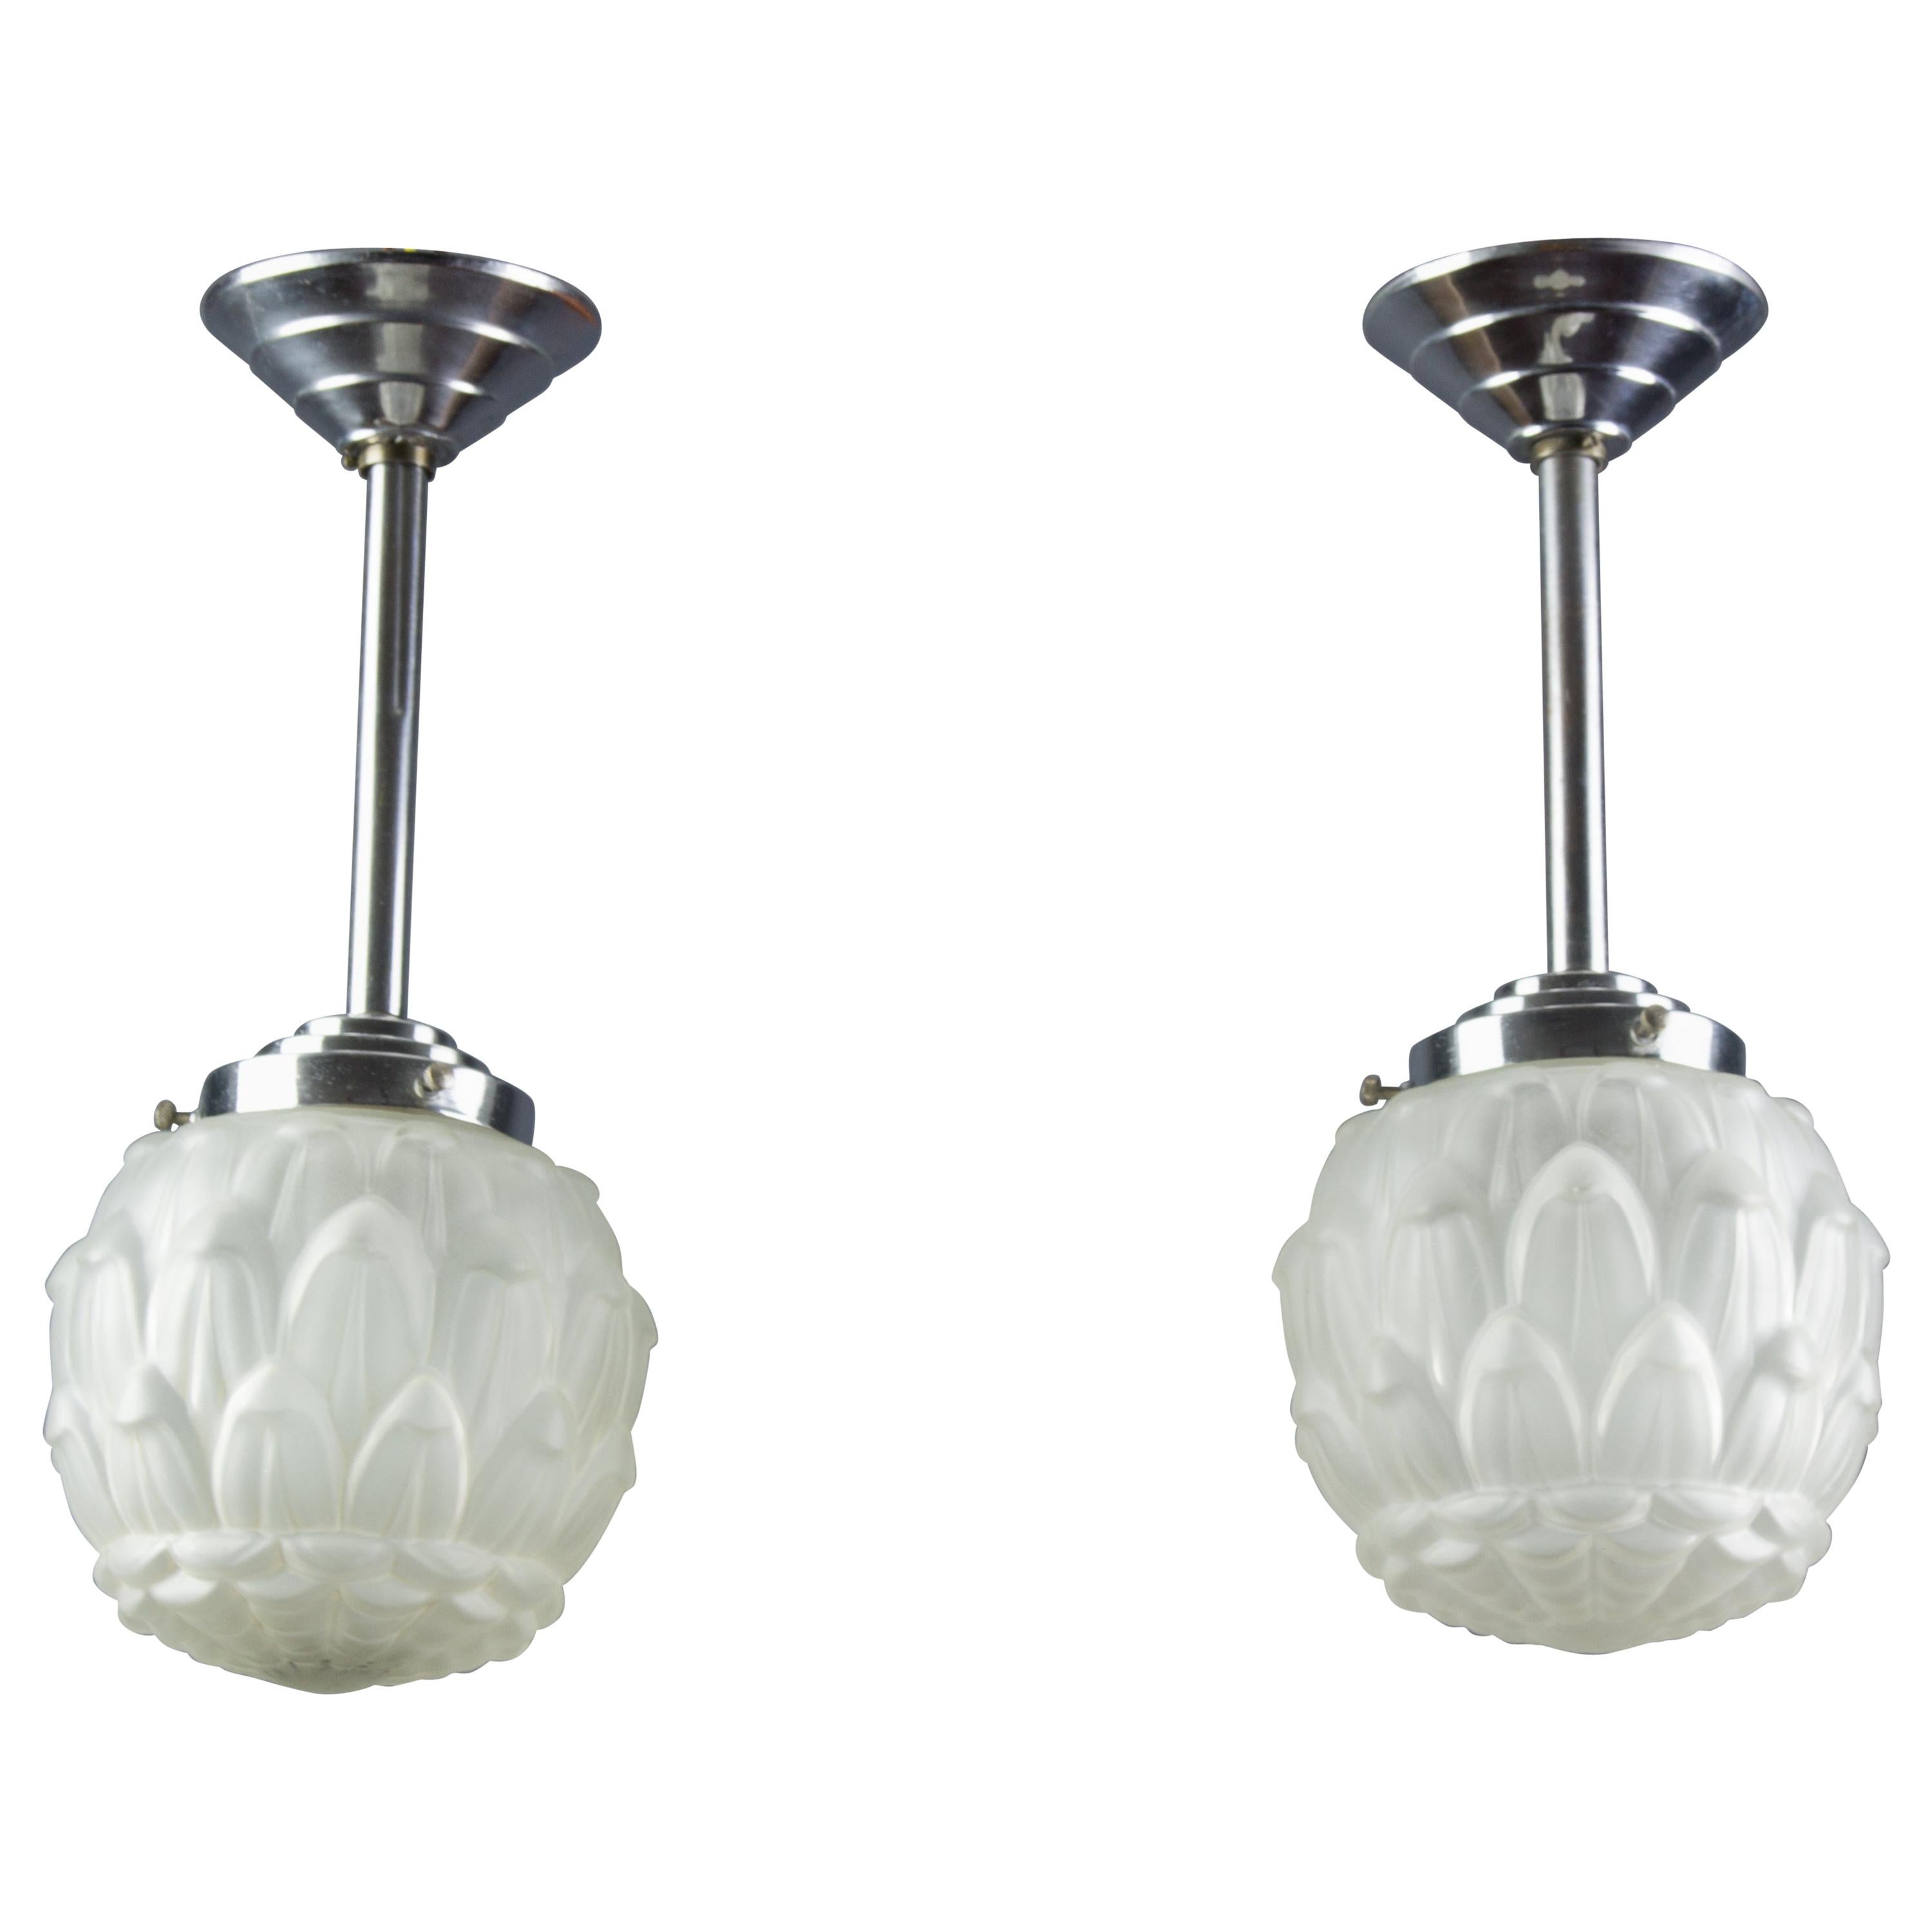 Pair of Art Deco White Frosted Glass and Chrome Pendant Ceiling Lights, 1930s